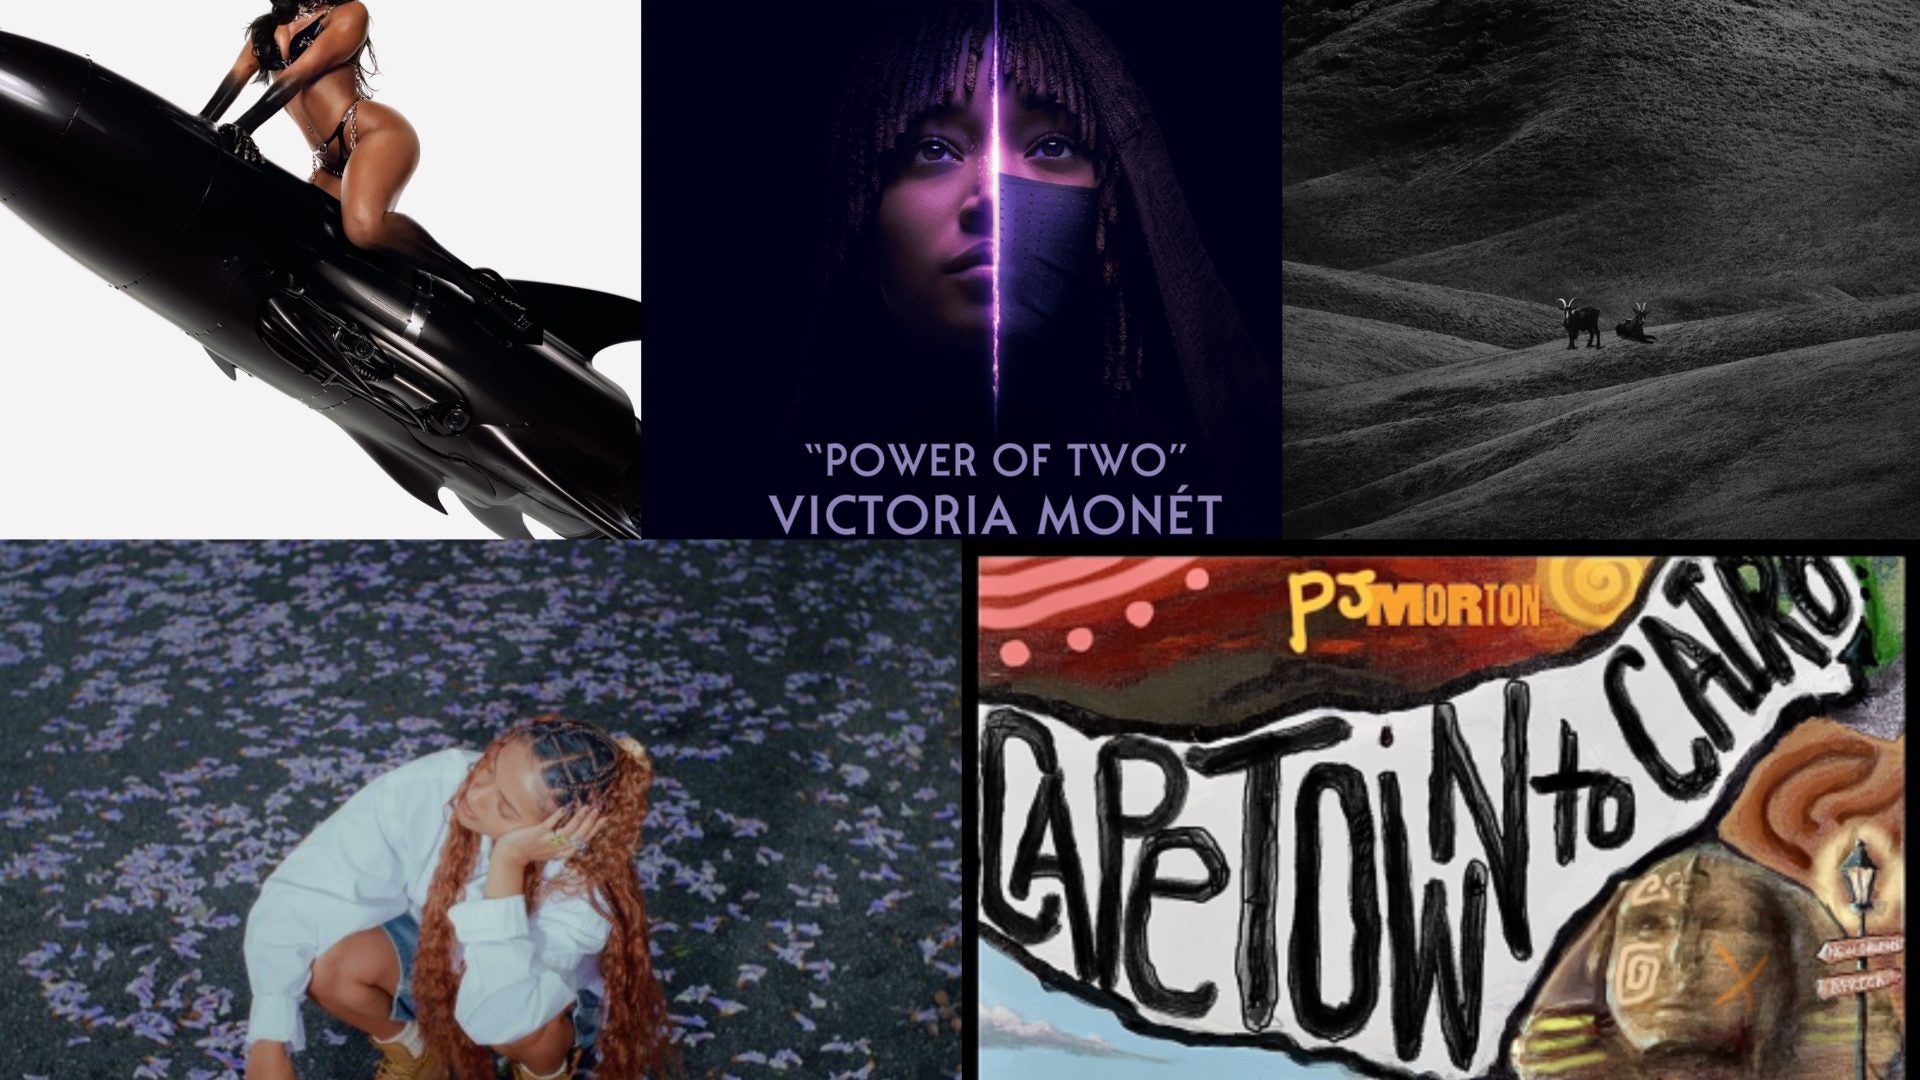 Best New Music This Week: Normani, Victoria Monét, Pharrell Williams And More